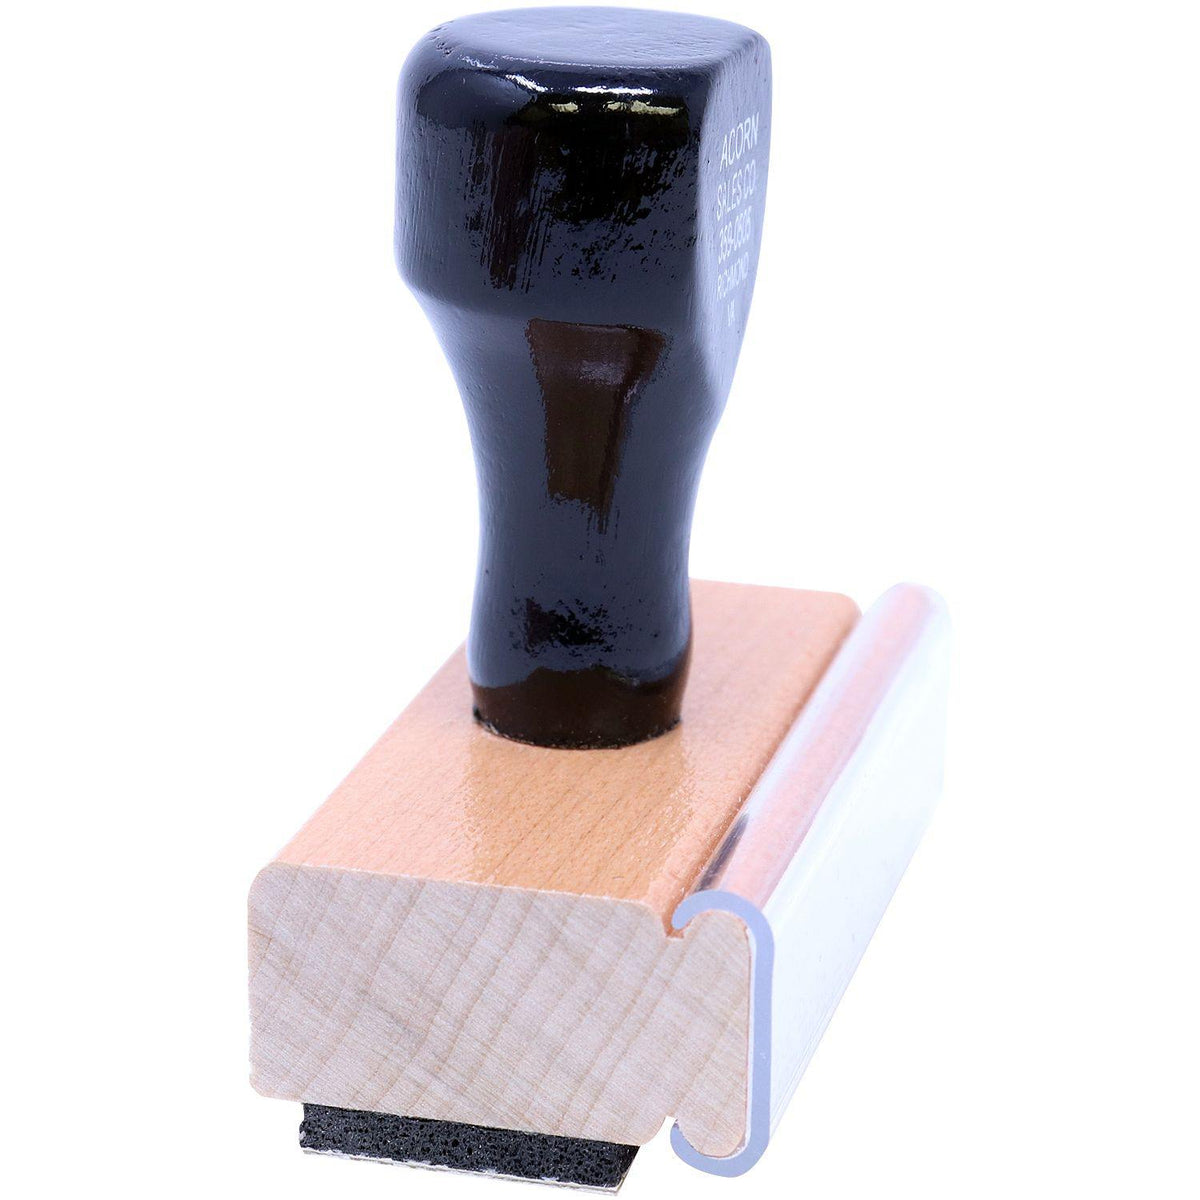 Side View of Superkid Rubber Stamp at an Angle